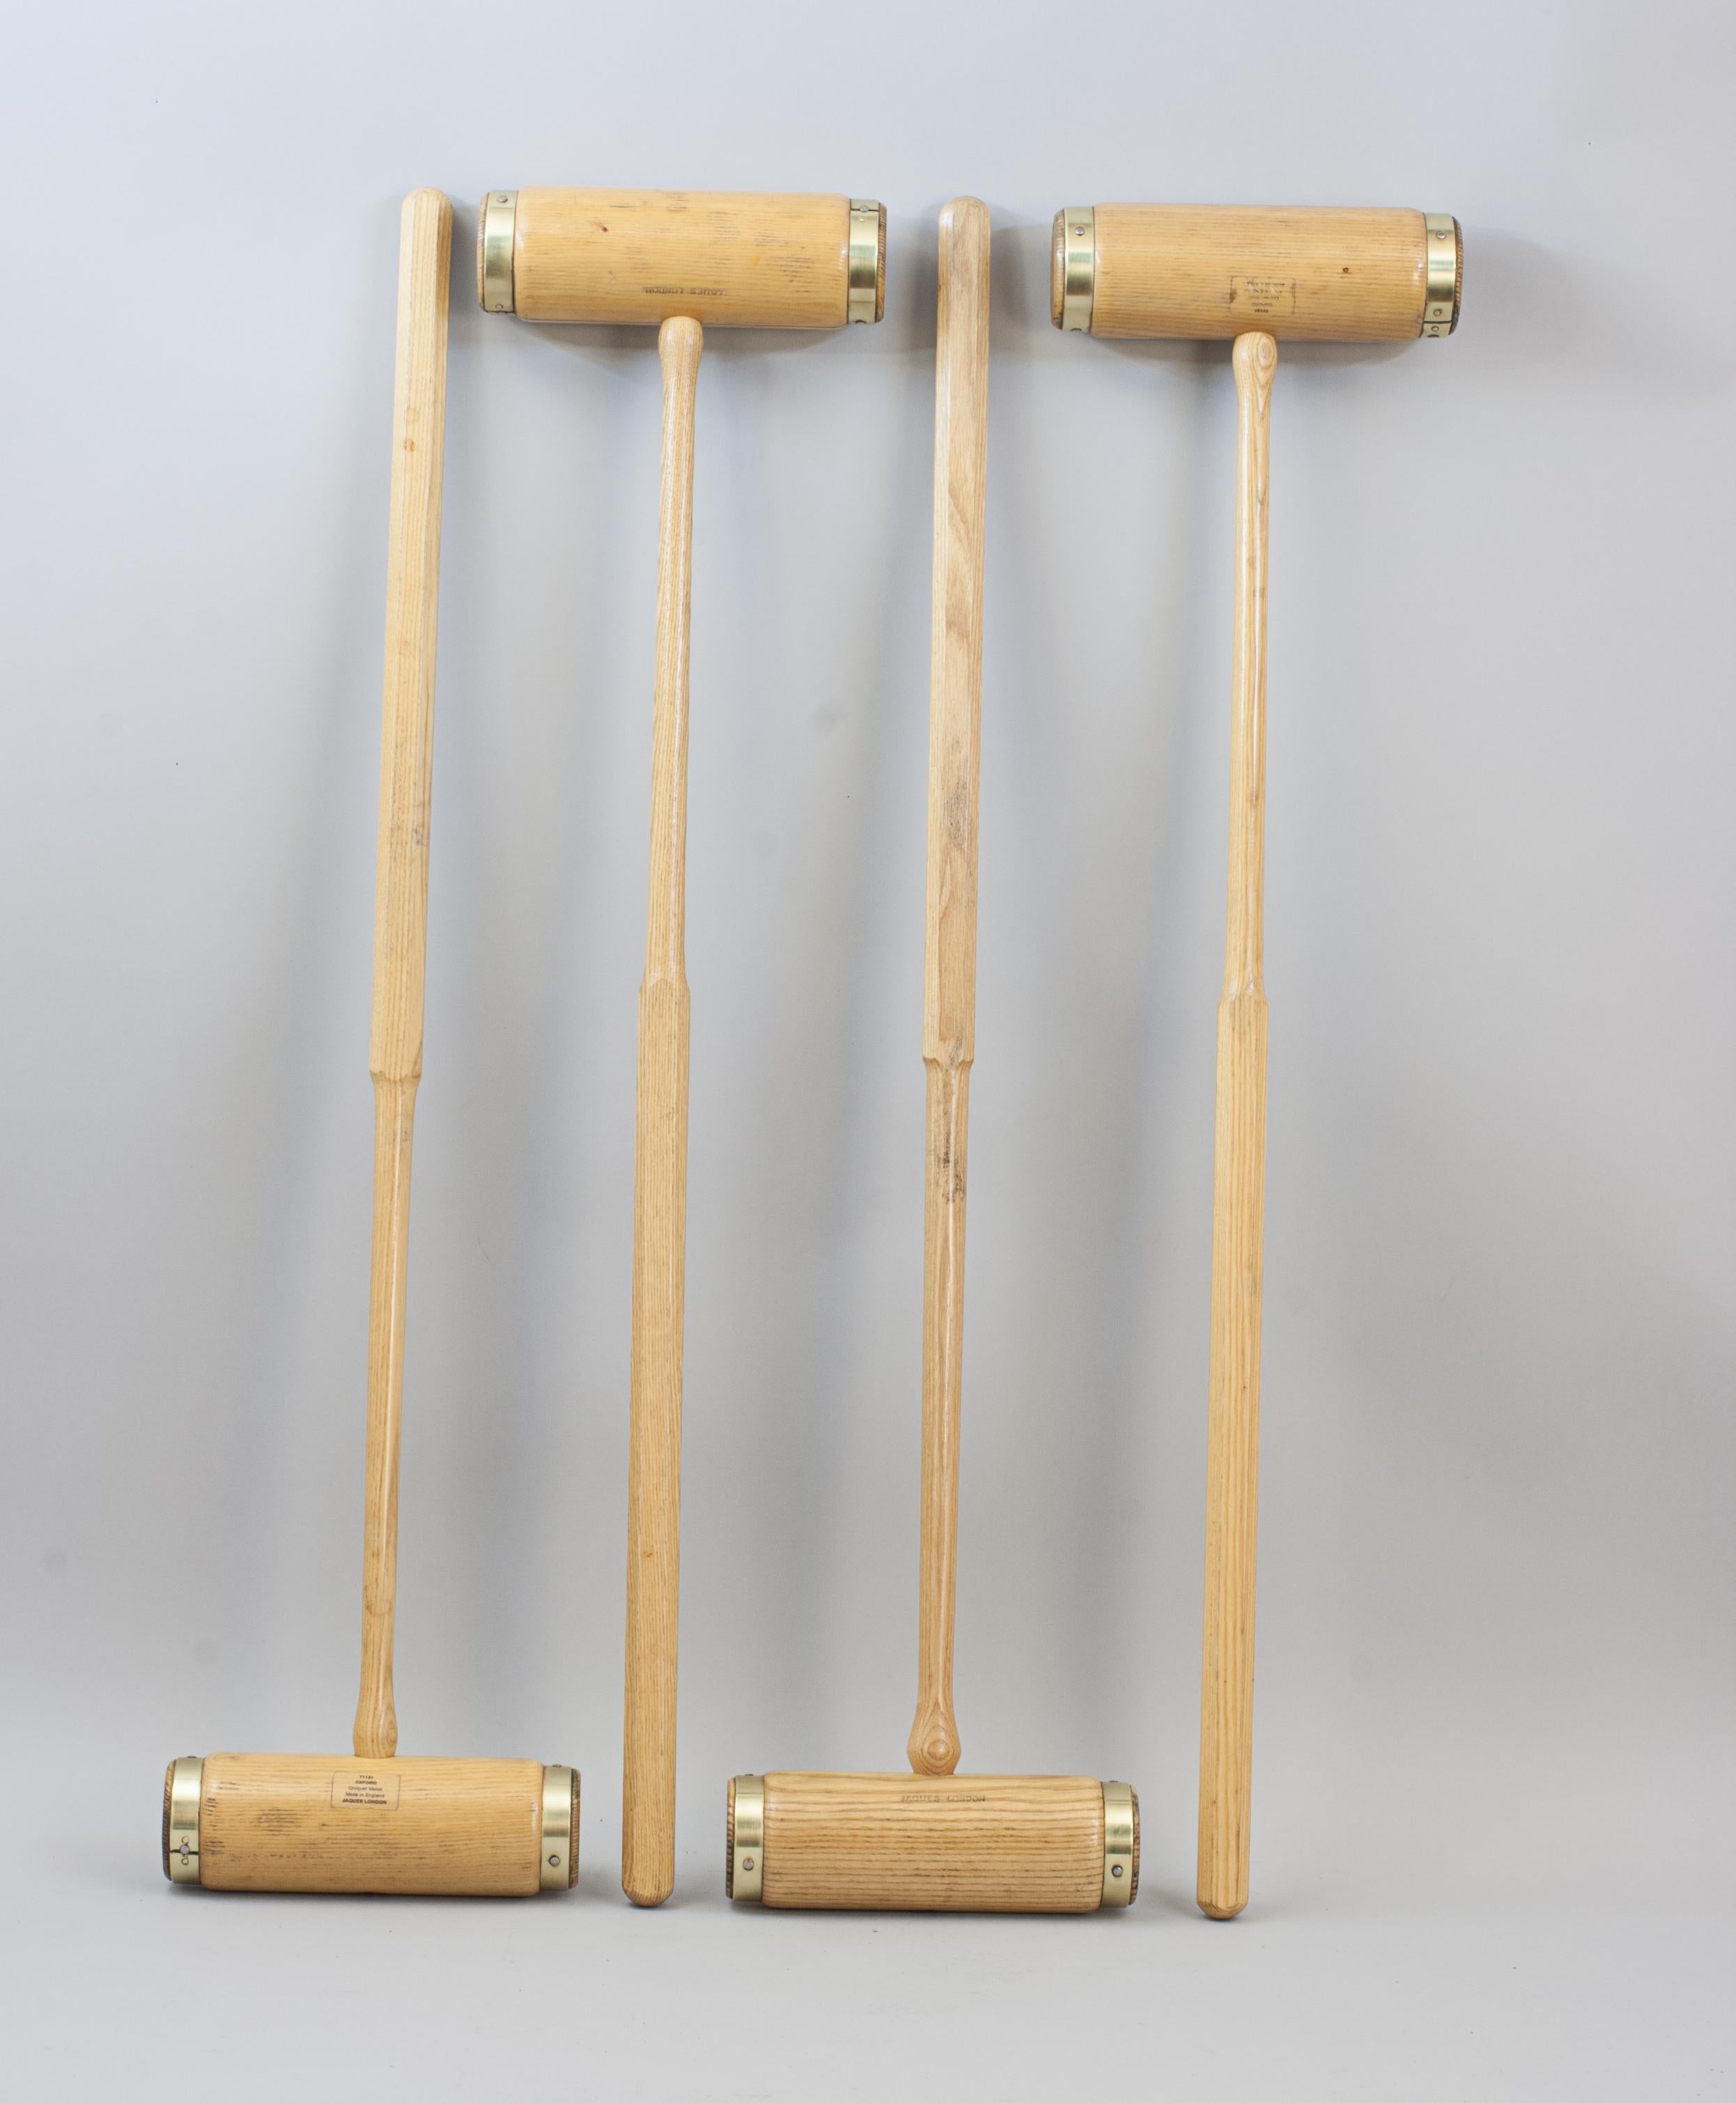 Vintage Jaques Brass Bound Oxford Croquet Set in Pine Box In Good Condition For Sale In Oxfordshire, GB